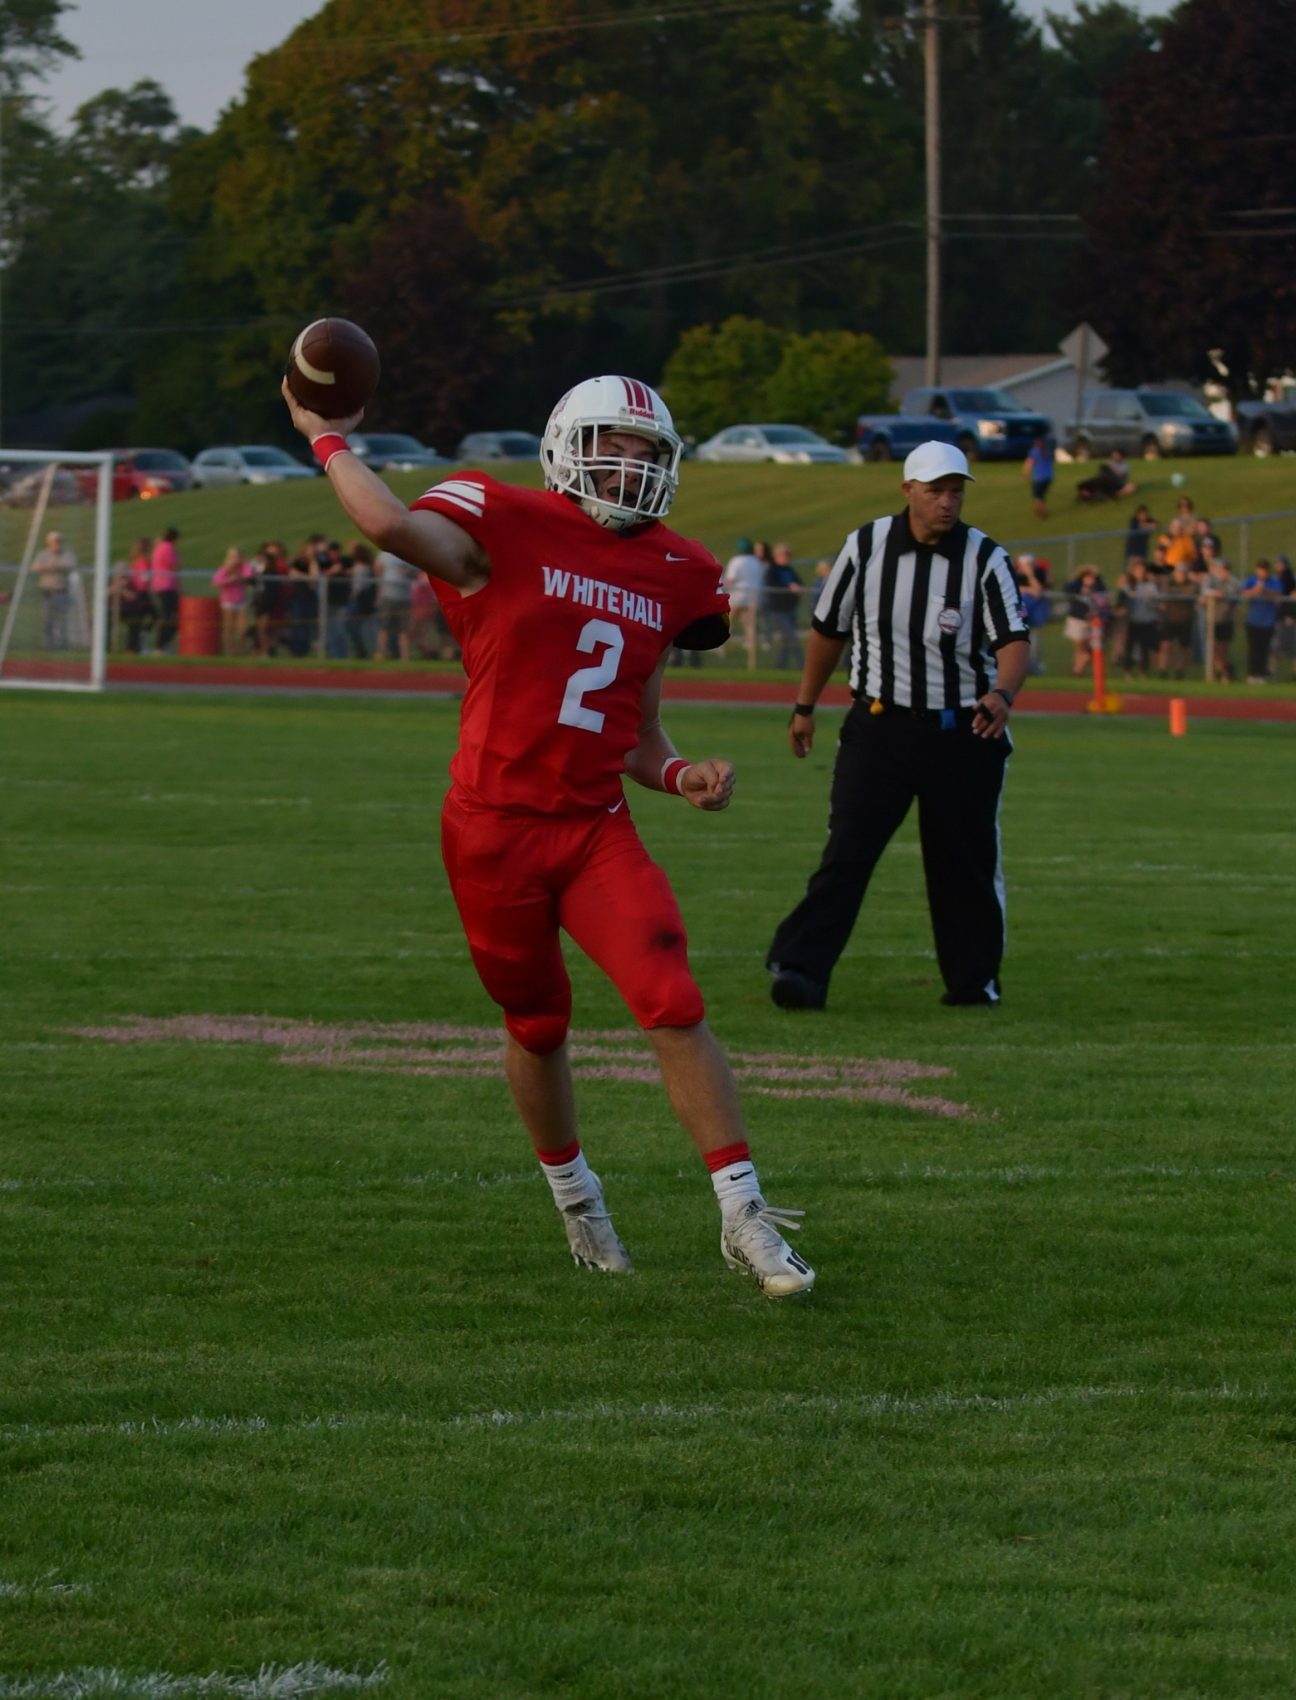 Stratton chosen LSJ offensive player of the month in football